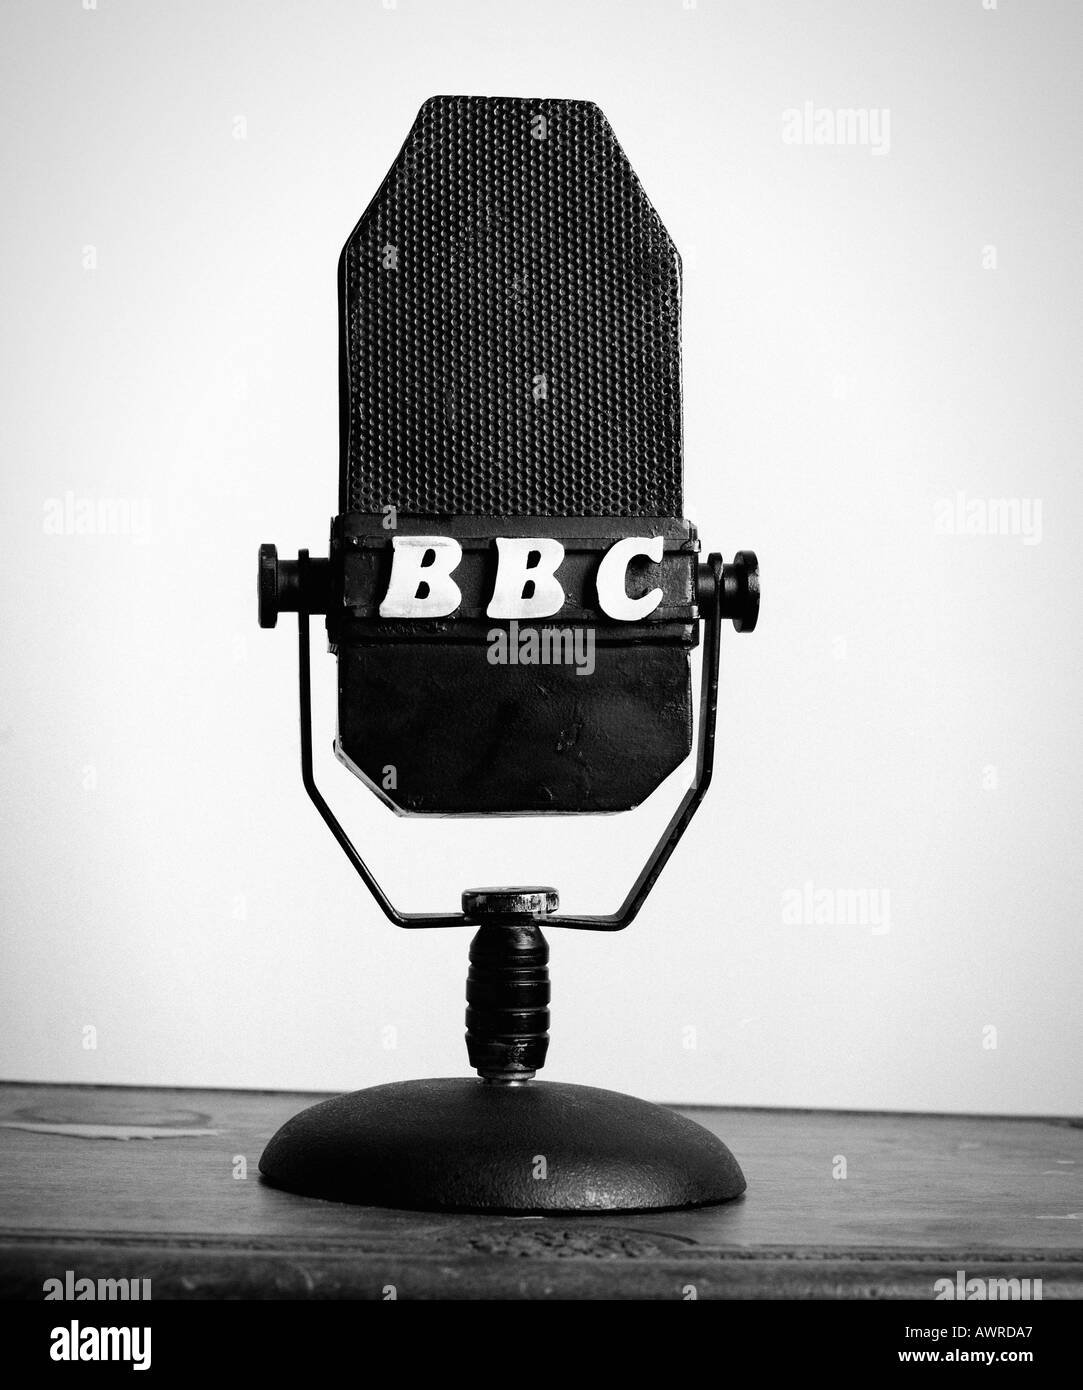 An old fashioned bbc radio microphone Stock Photo